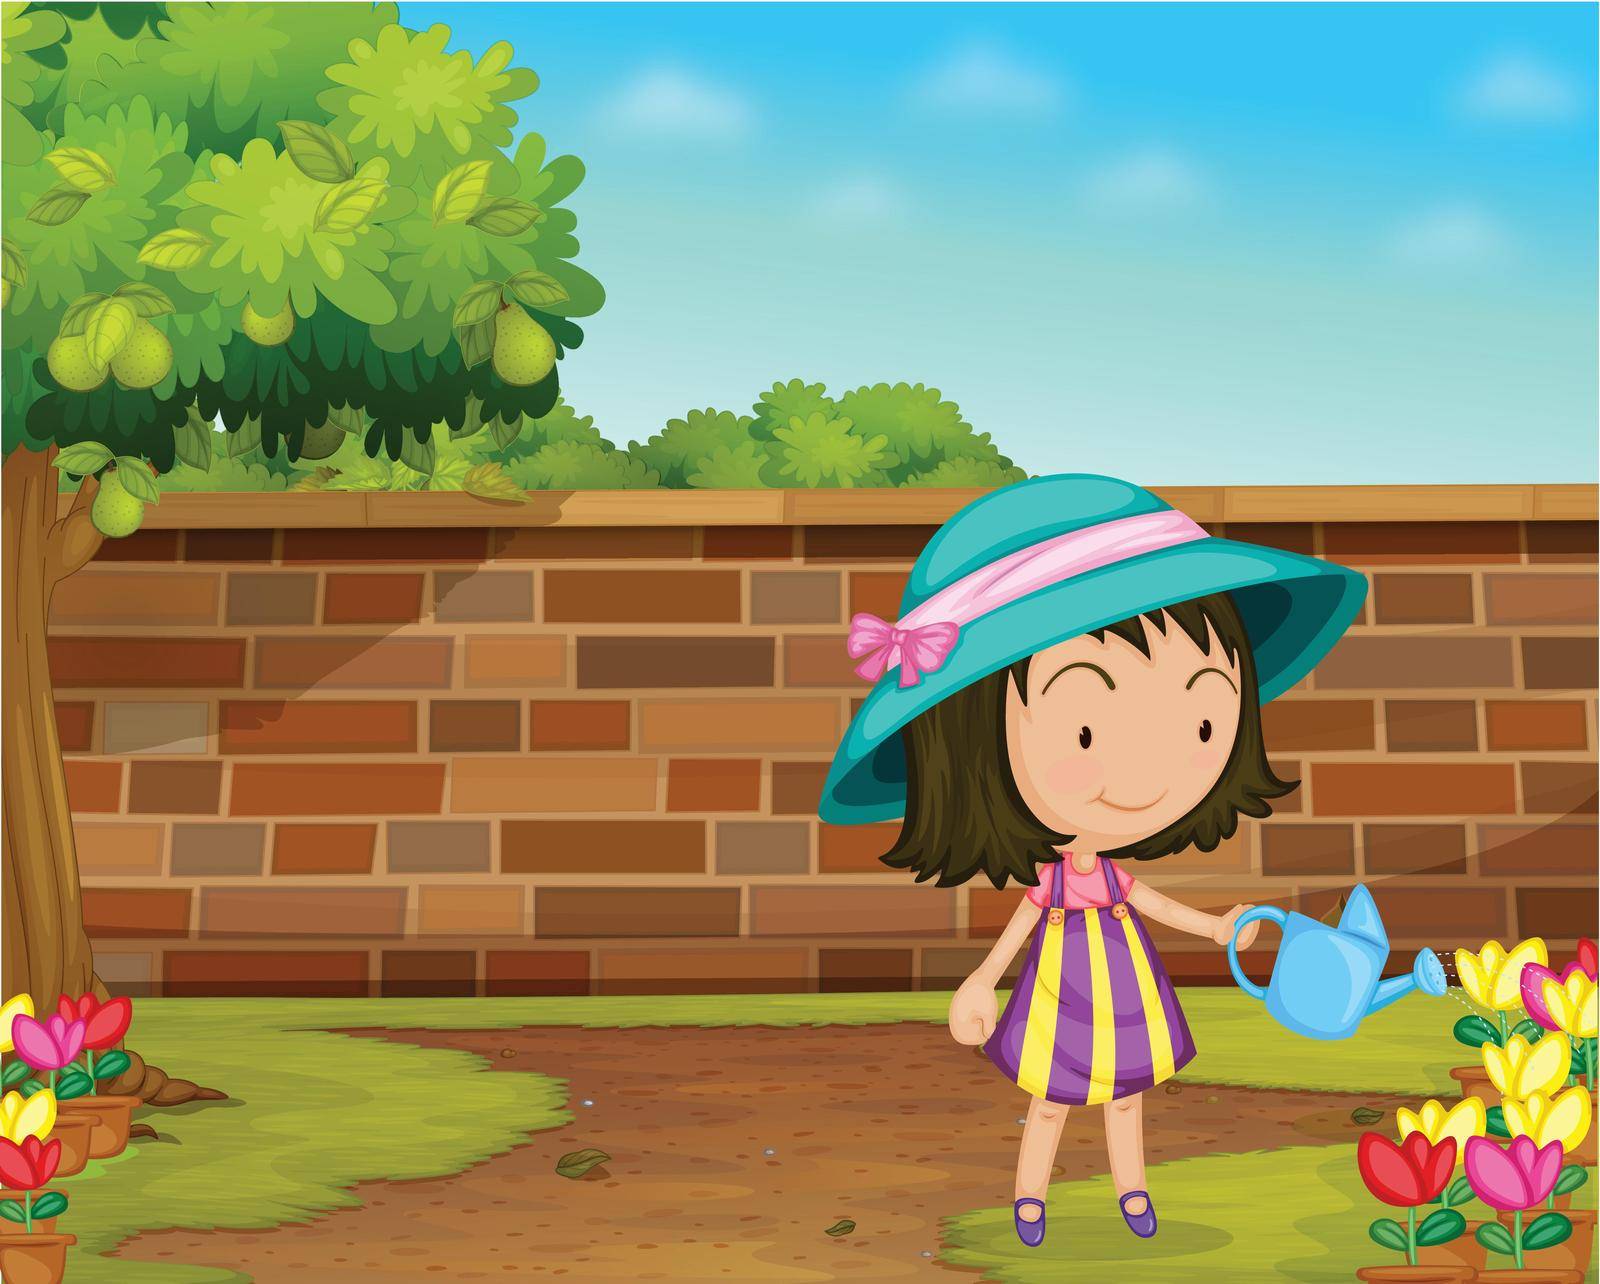 Illustration of a girl watering flowers